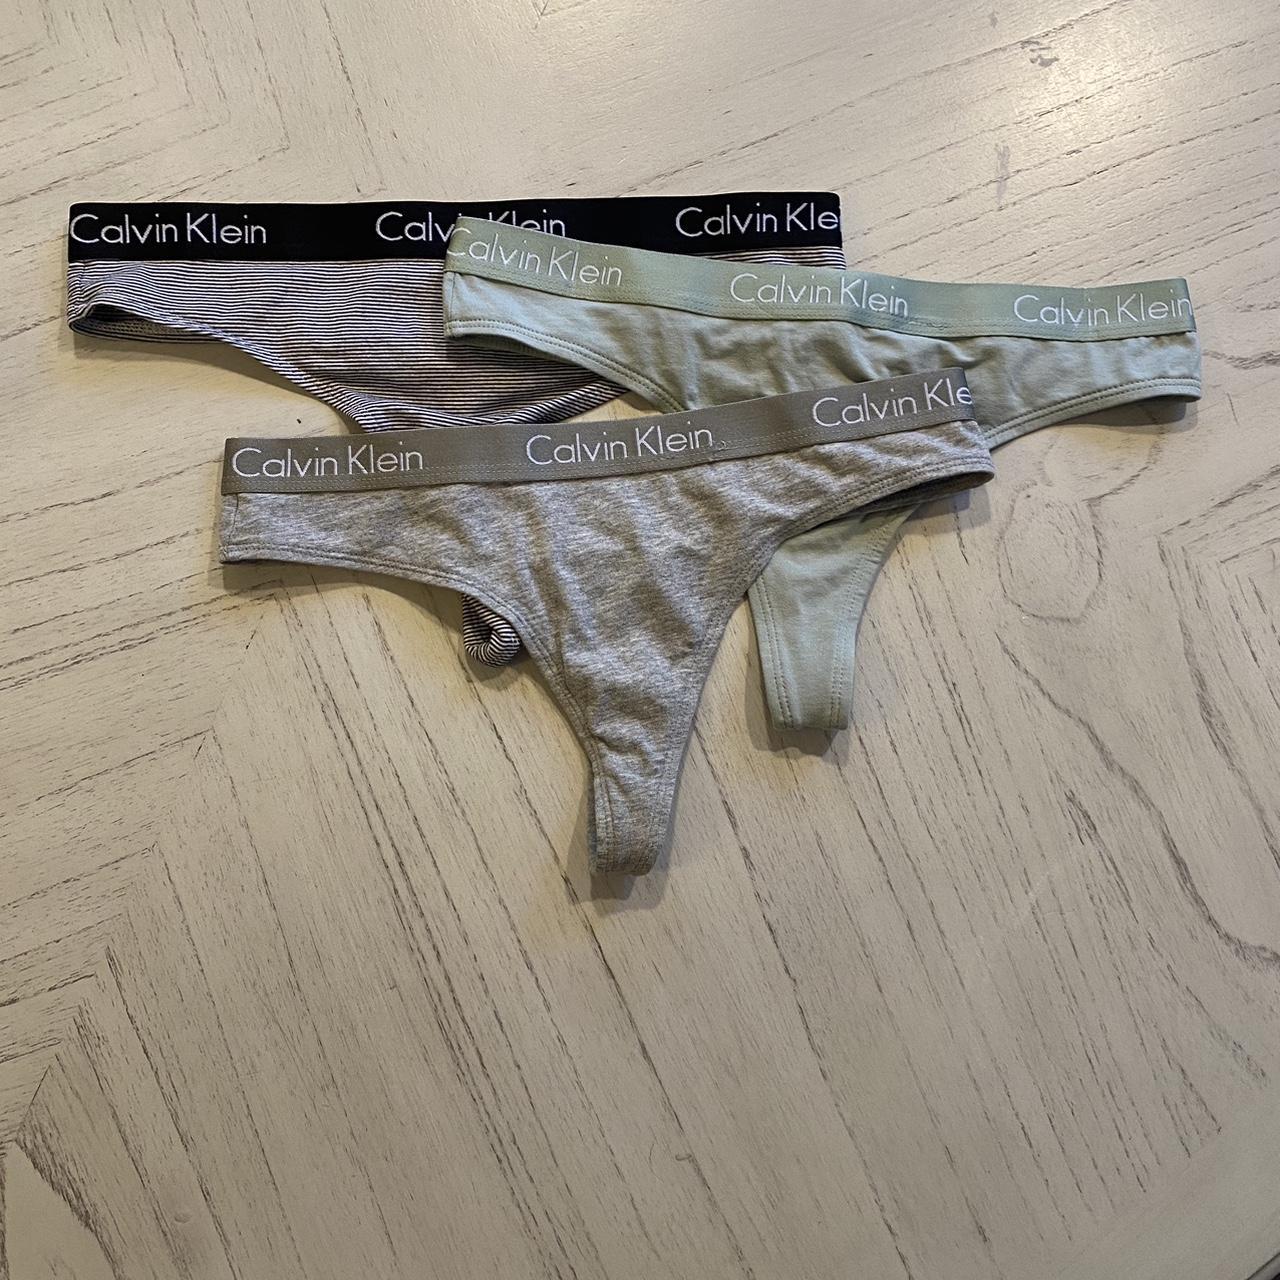 Calvin Klein Perfectly Fit T-Shirt Bra Nude F3167 - Depop